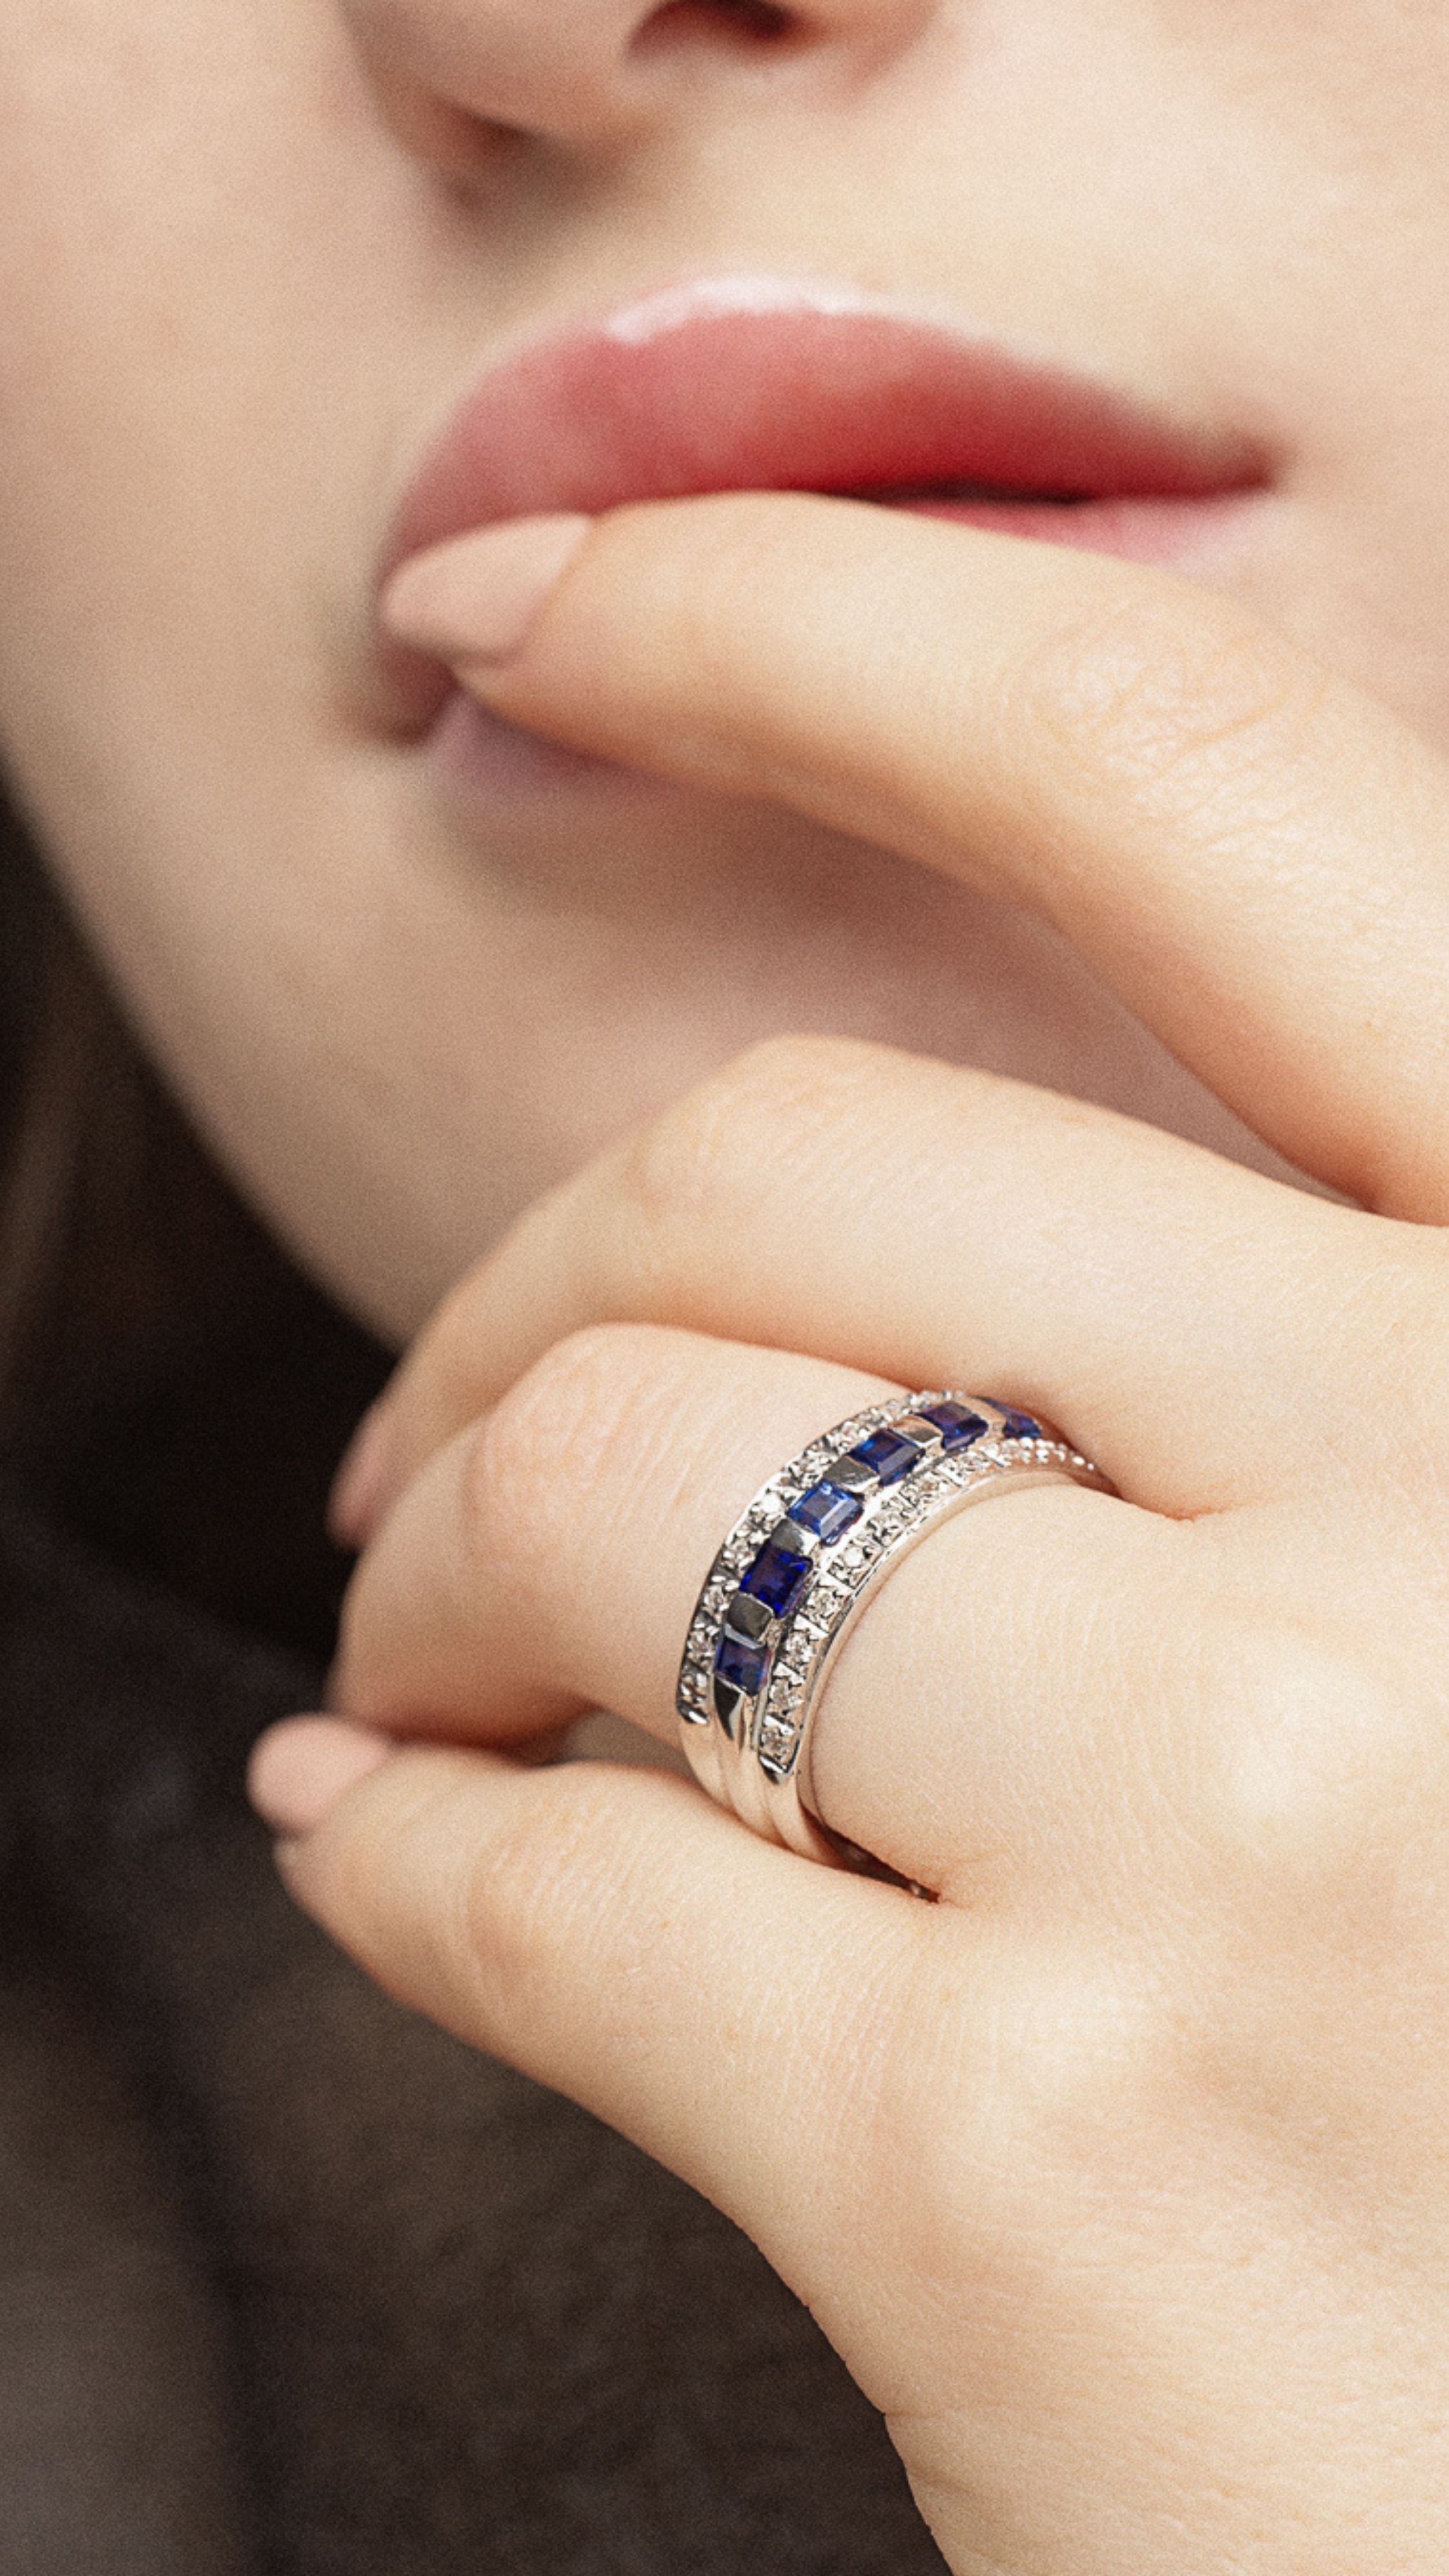 Conde de diamante Azura Ring. 18K white gold band ring with a center row of carré cut blue sapphires flanked on each side by bands of pave white diamonds. Shown on model facing front.